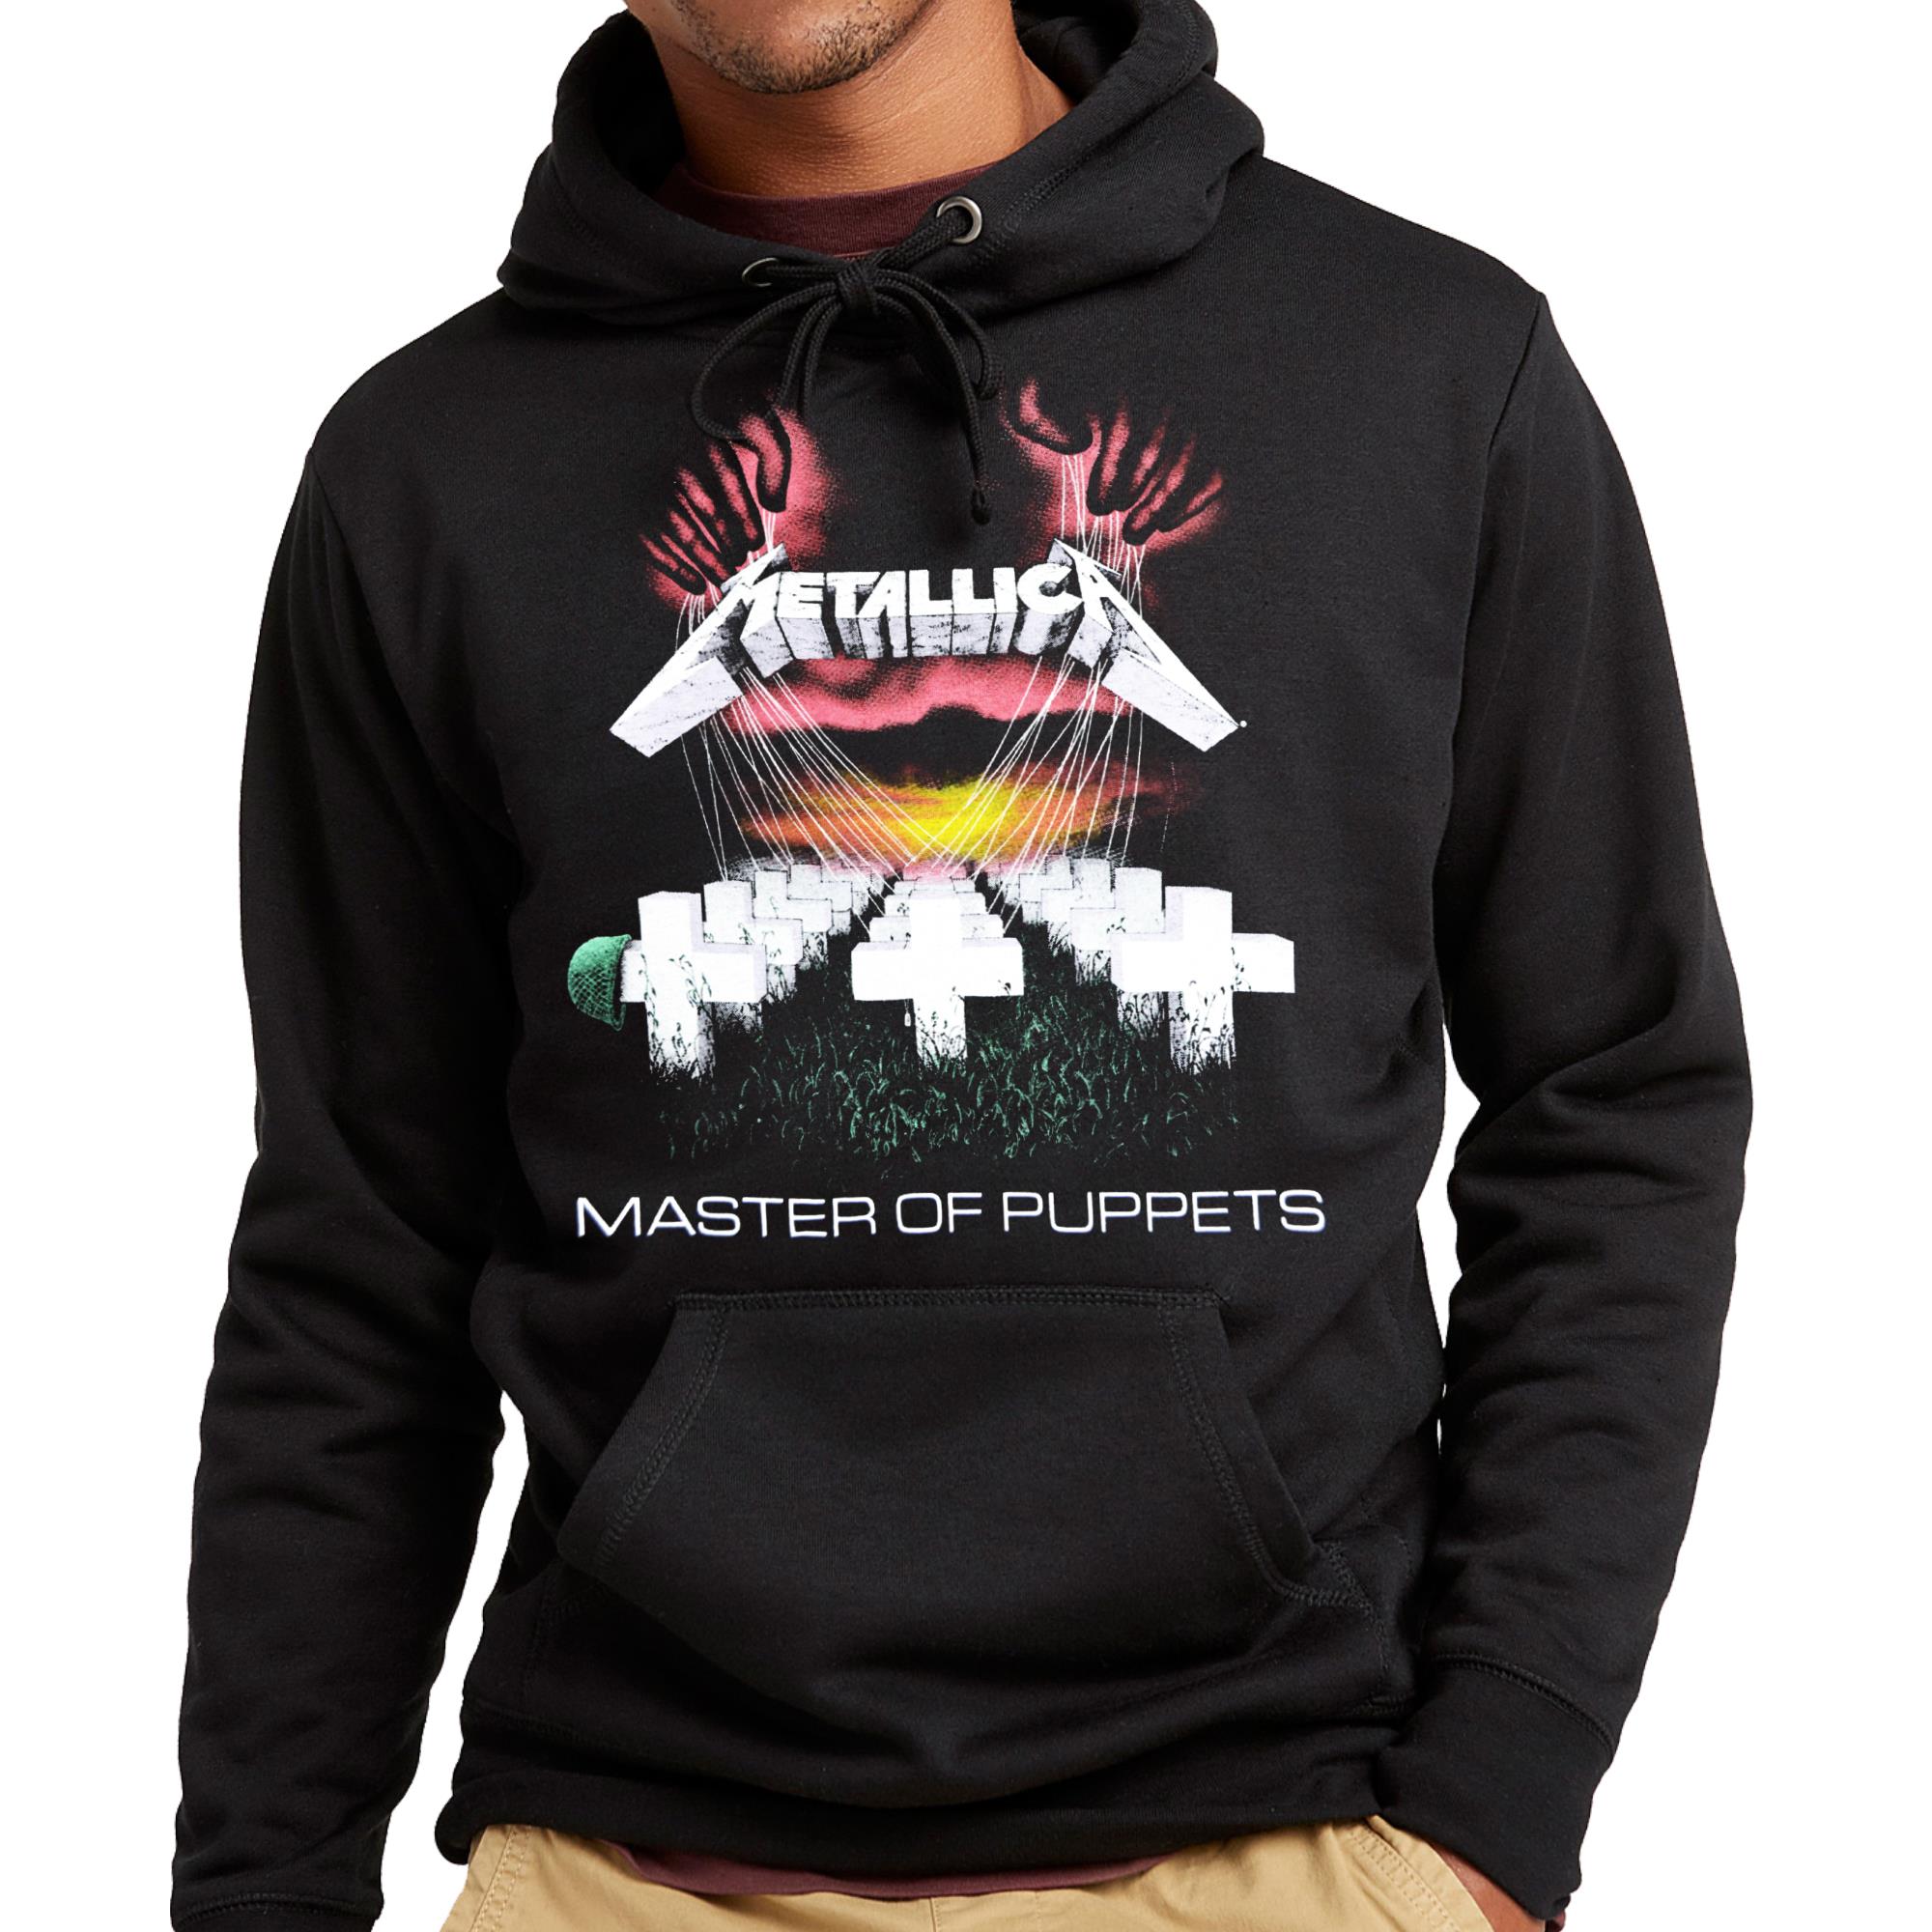 Master of Puppets Created Out of The Words Master of Puppets Boy's Hooded Sweatshirt